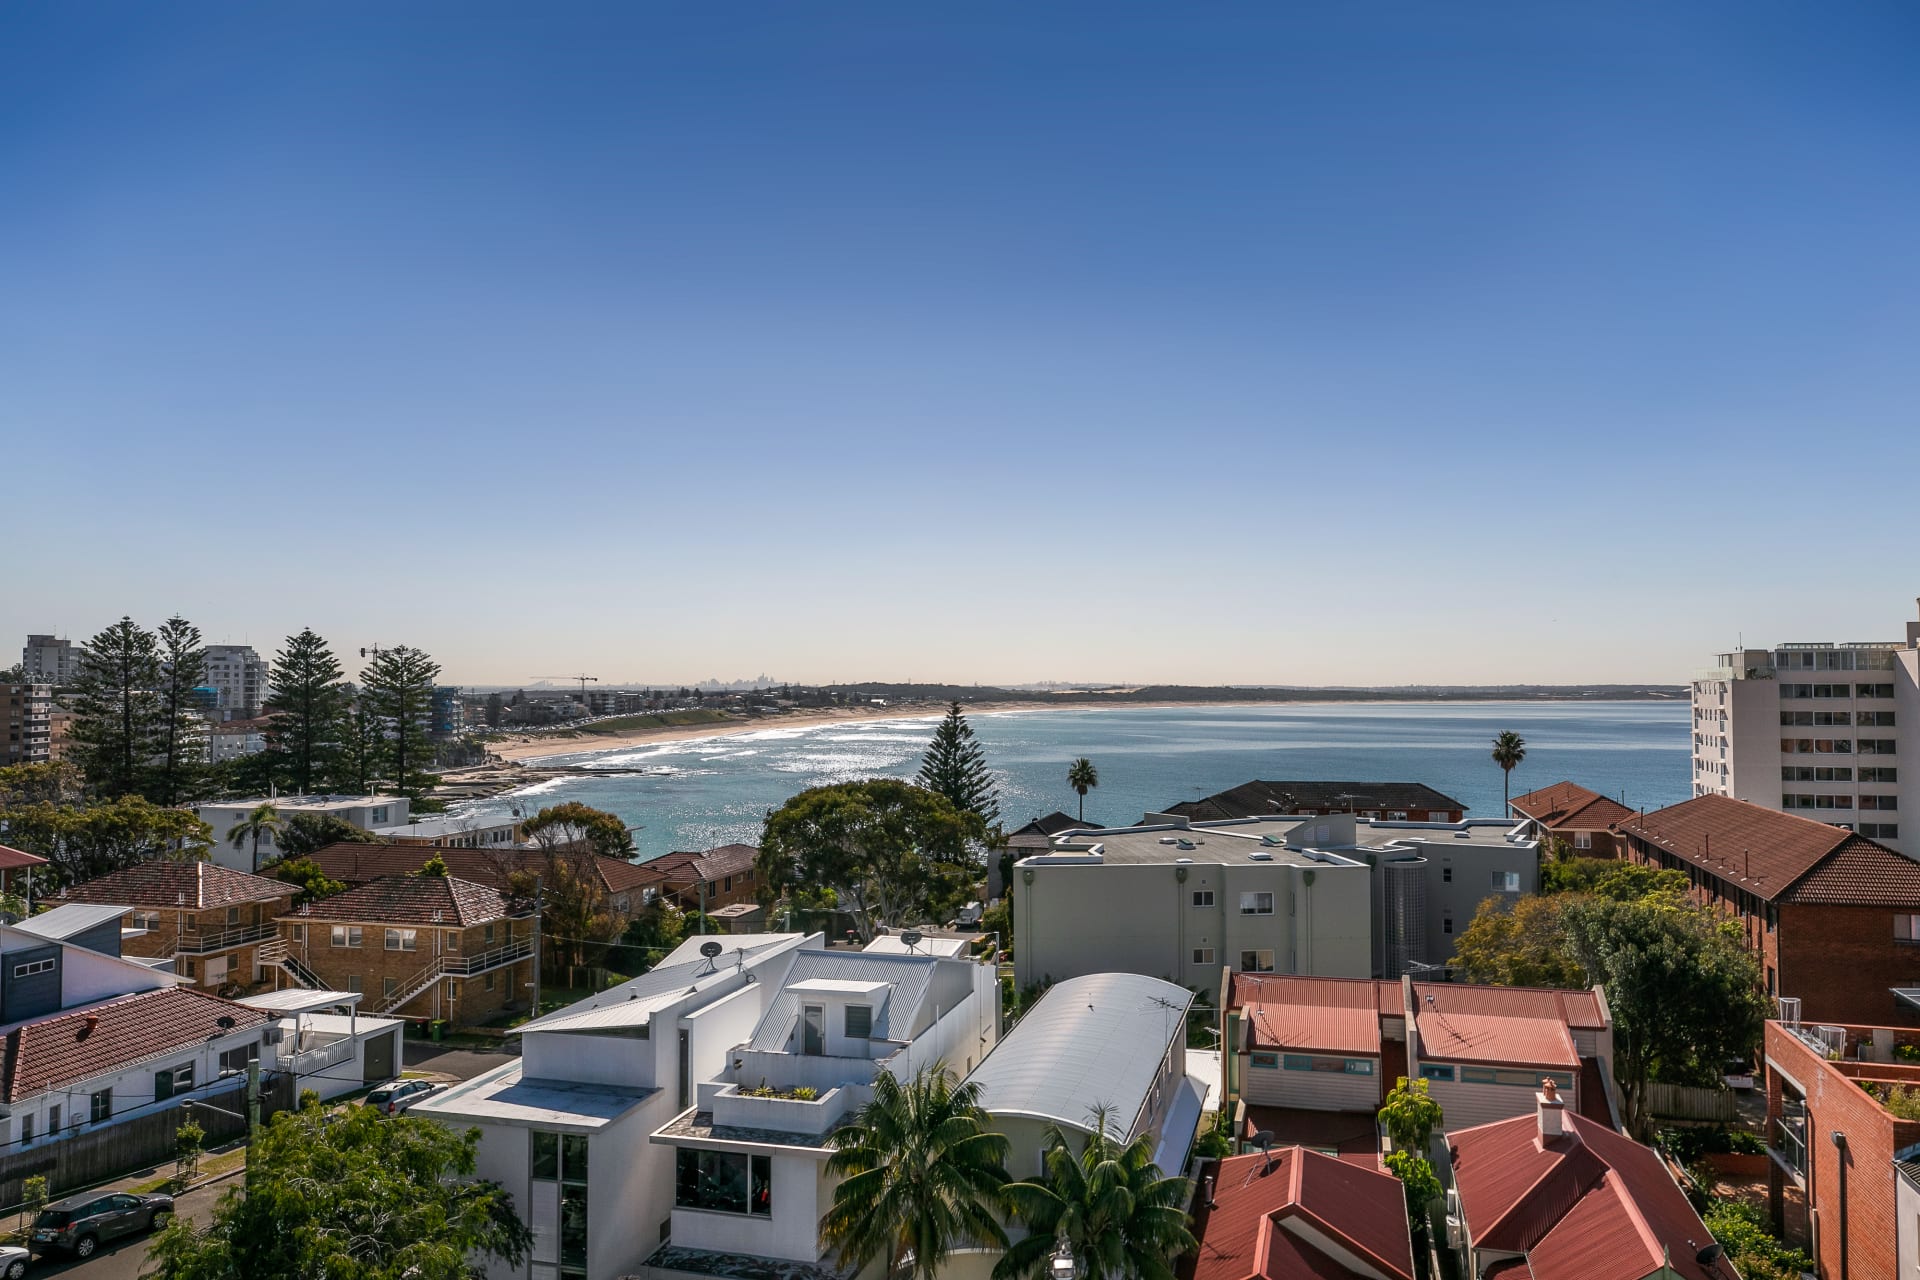 Wanting to extend summer? Check out six of NSW's best coastal apartment developments